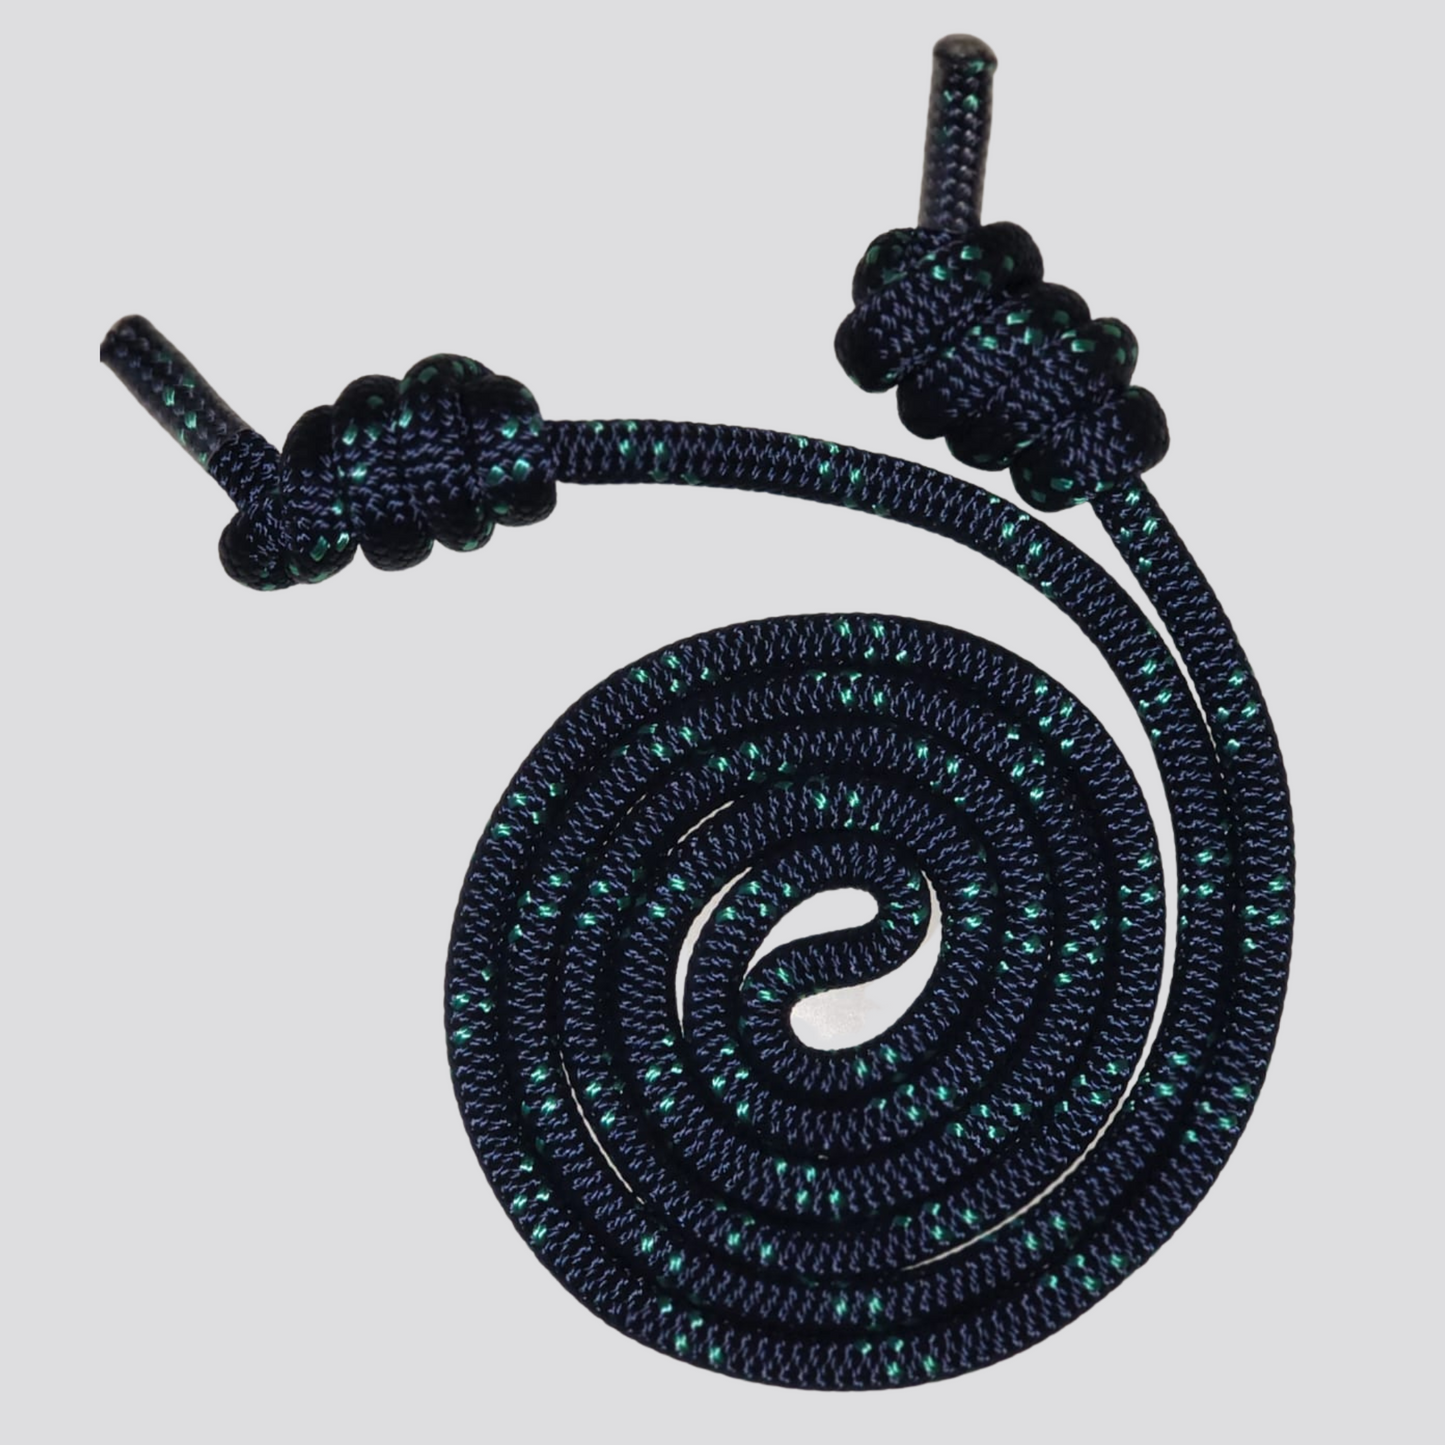 Moment Flow Rope | AXiOFiT Navy Sky